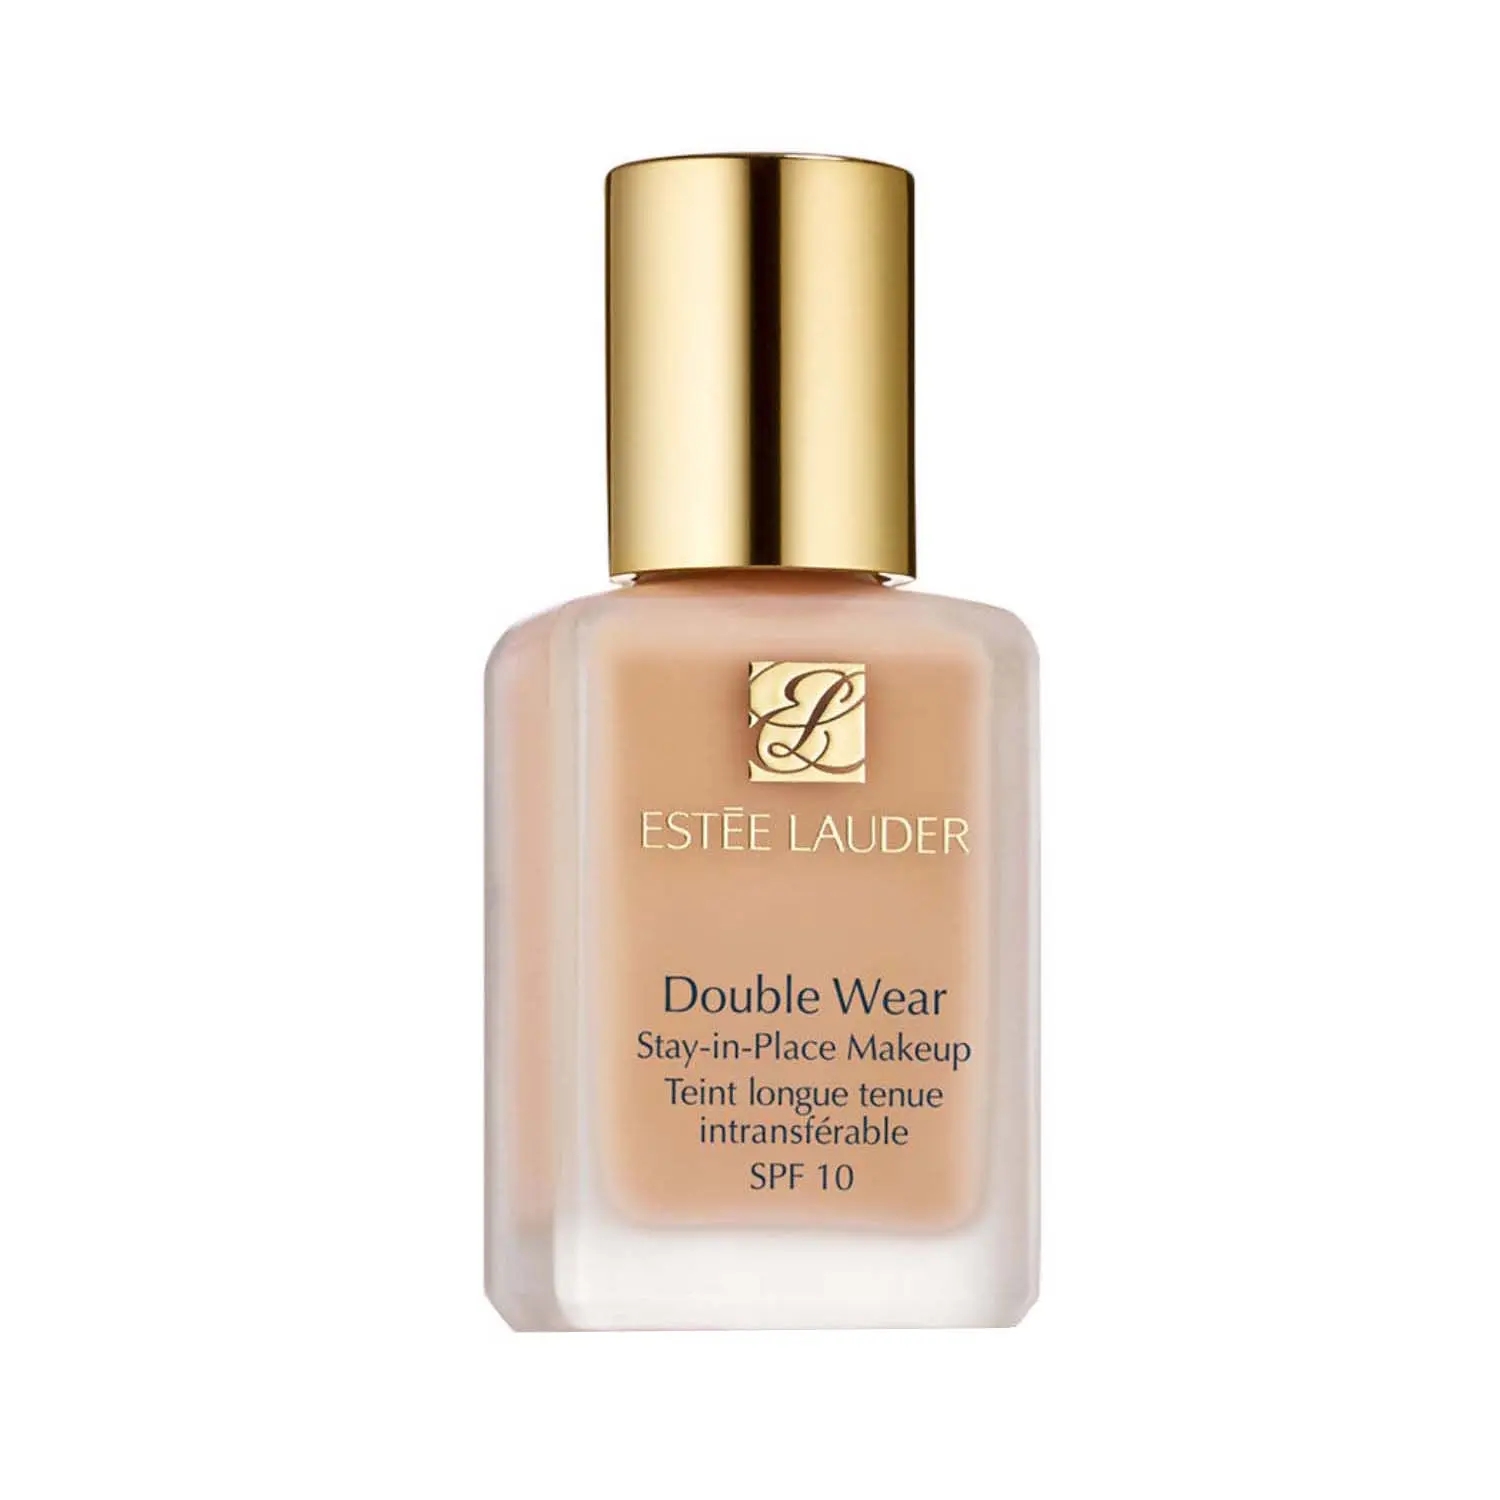 Estee Lauder Double Wear Stay-In-Place Makeup Foundation SPF 10 - 1W2 Sand (30ml)